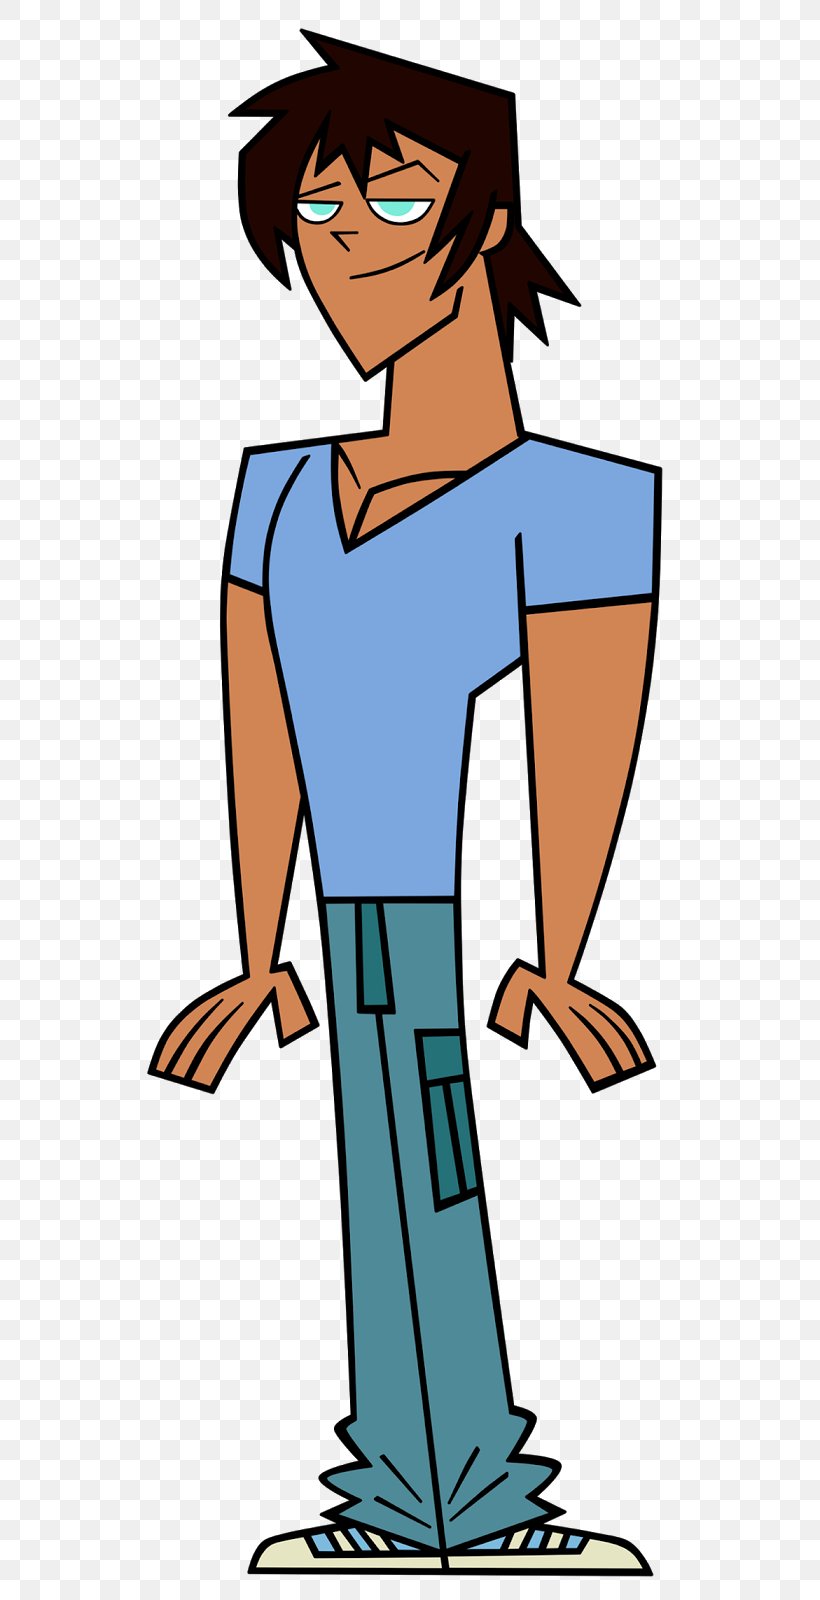 Total Drama Island Character Line Art Clip Art, PNG, 530x1600px ...